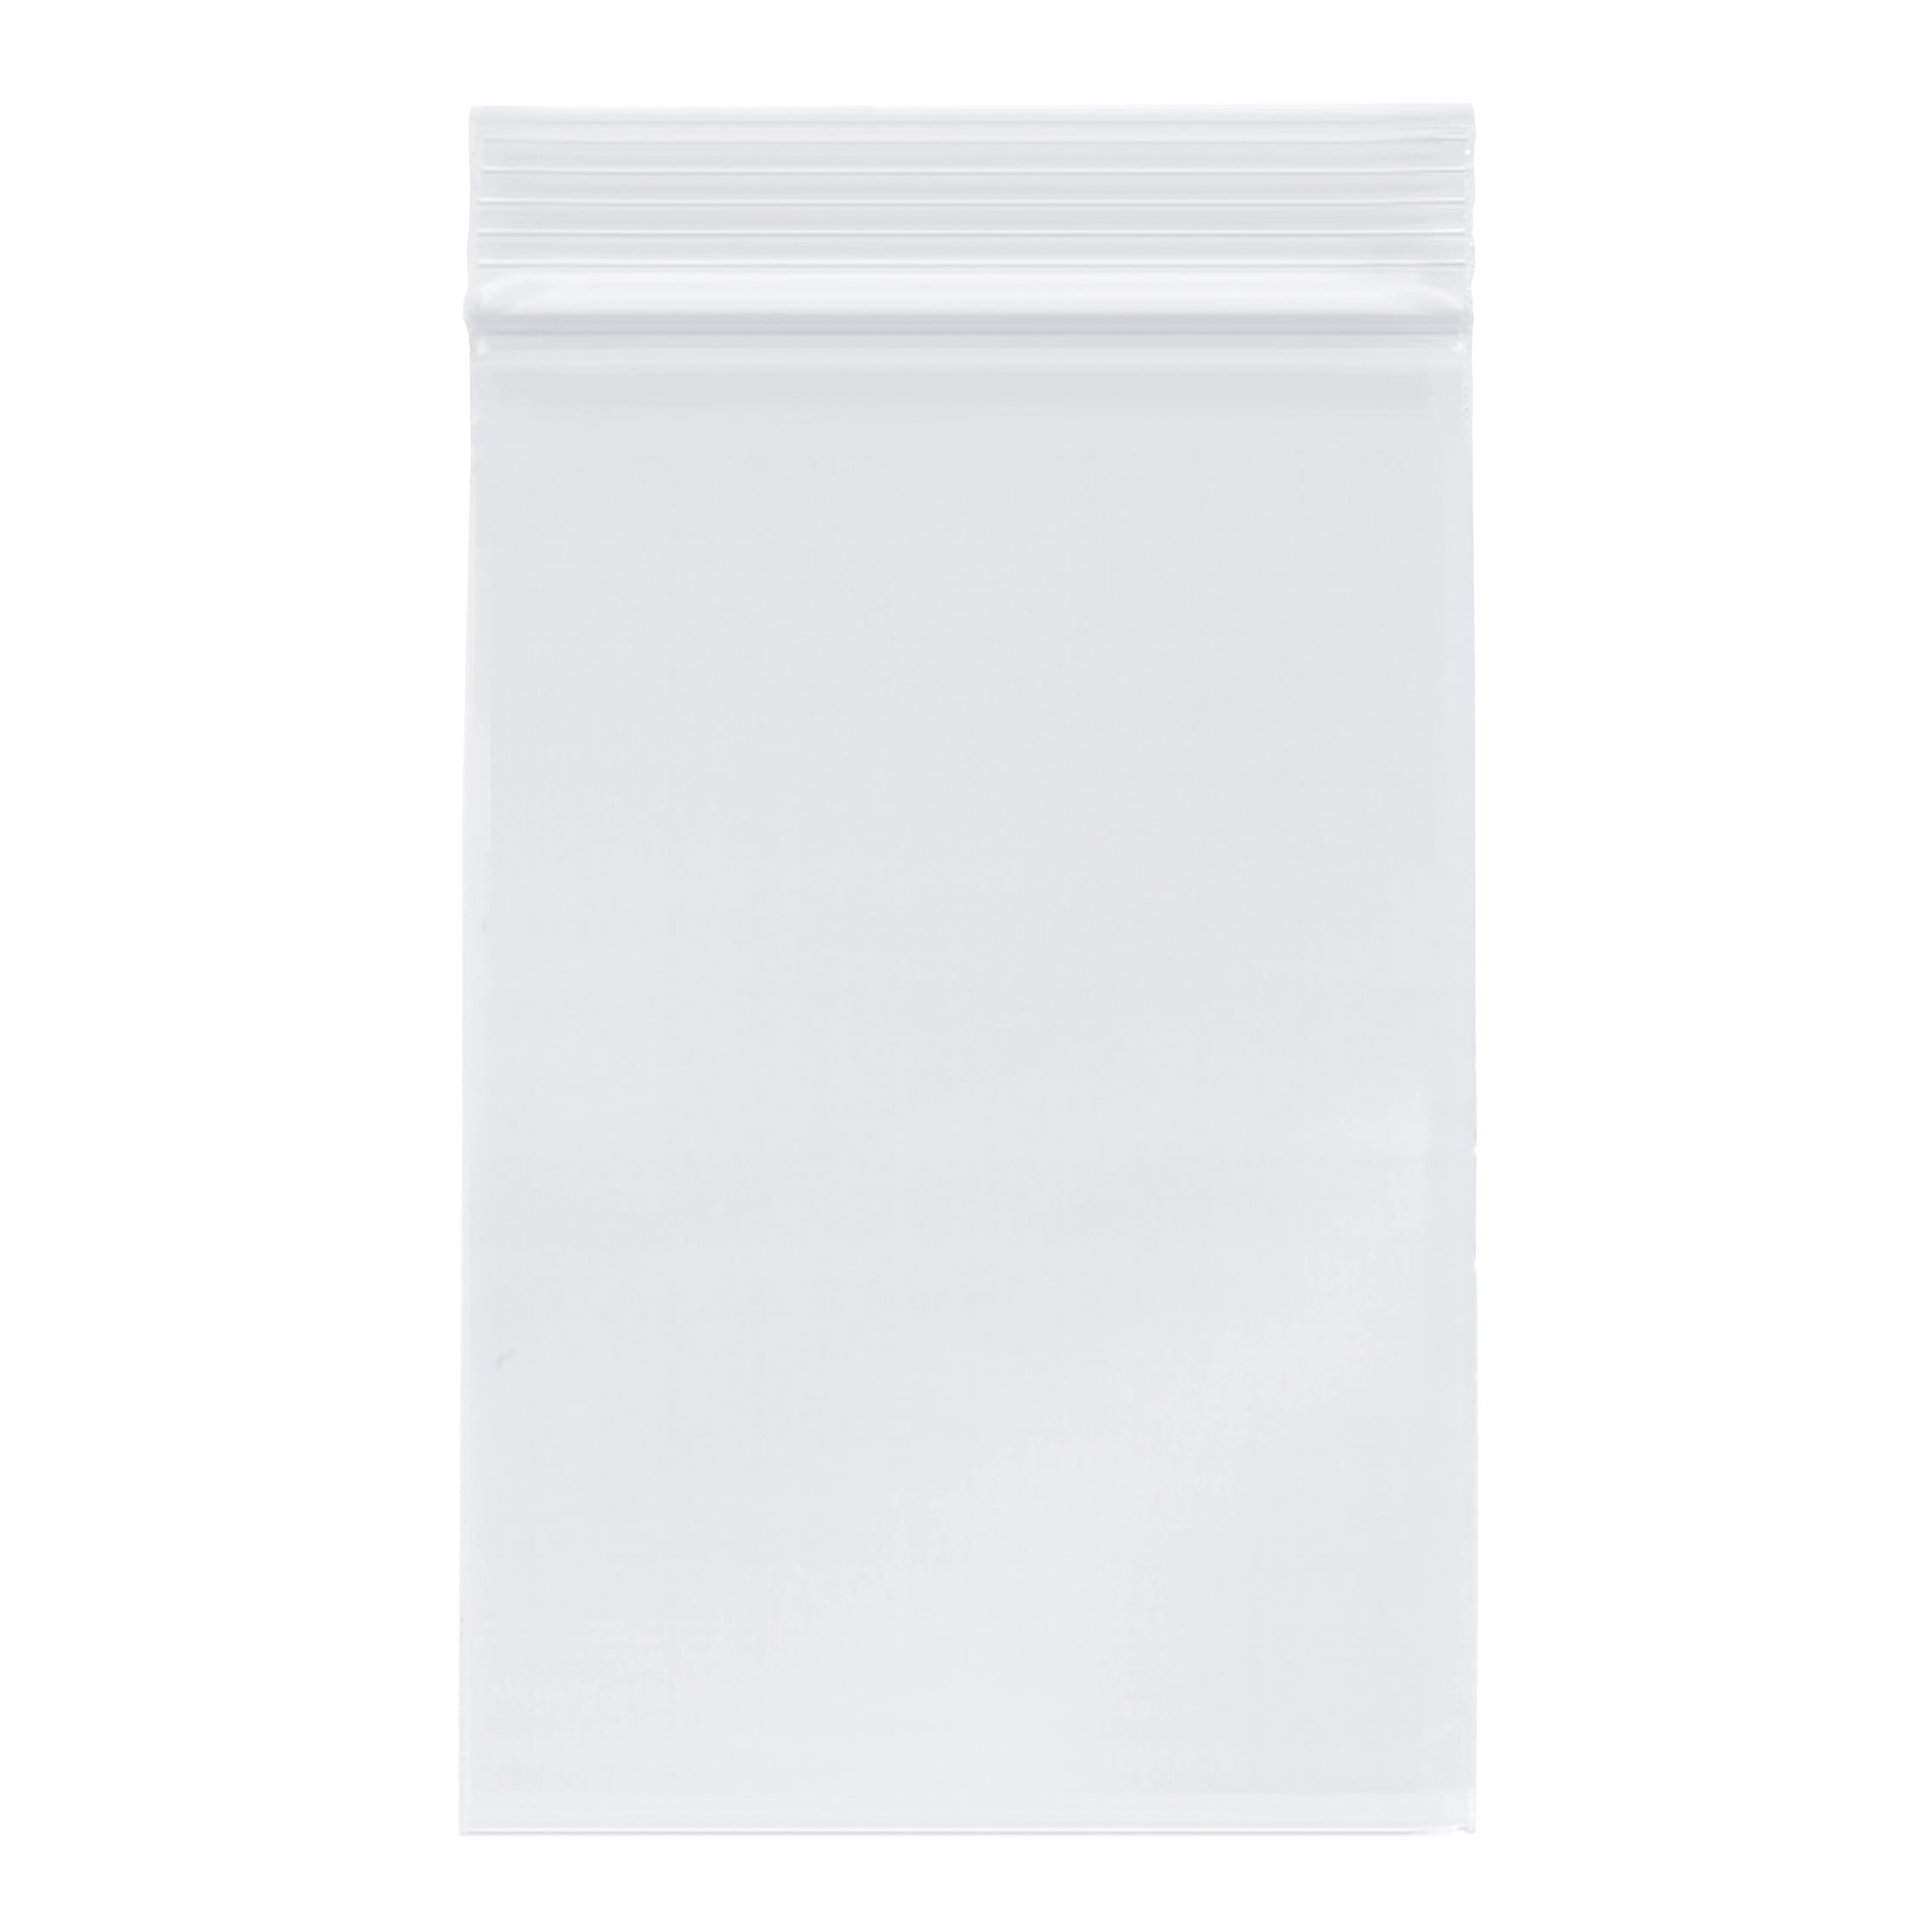 1000 pack of 5x6 Reclosable Resealable Clear Zip Lock Poly Plastic Bags 2 Mil 